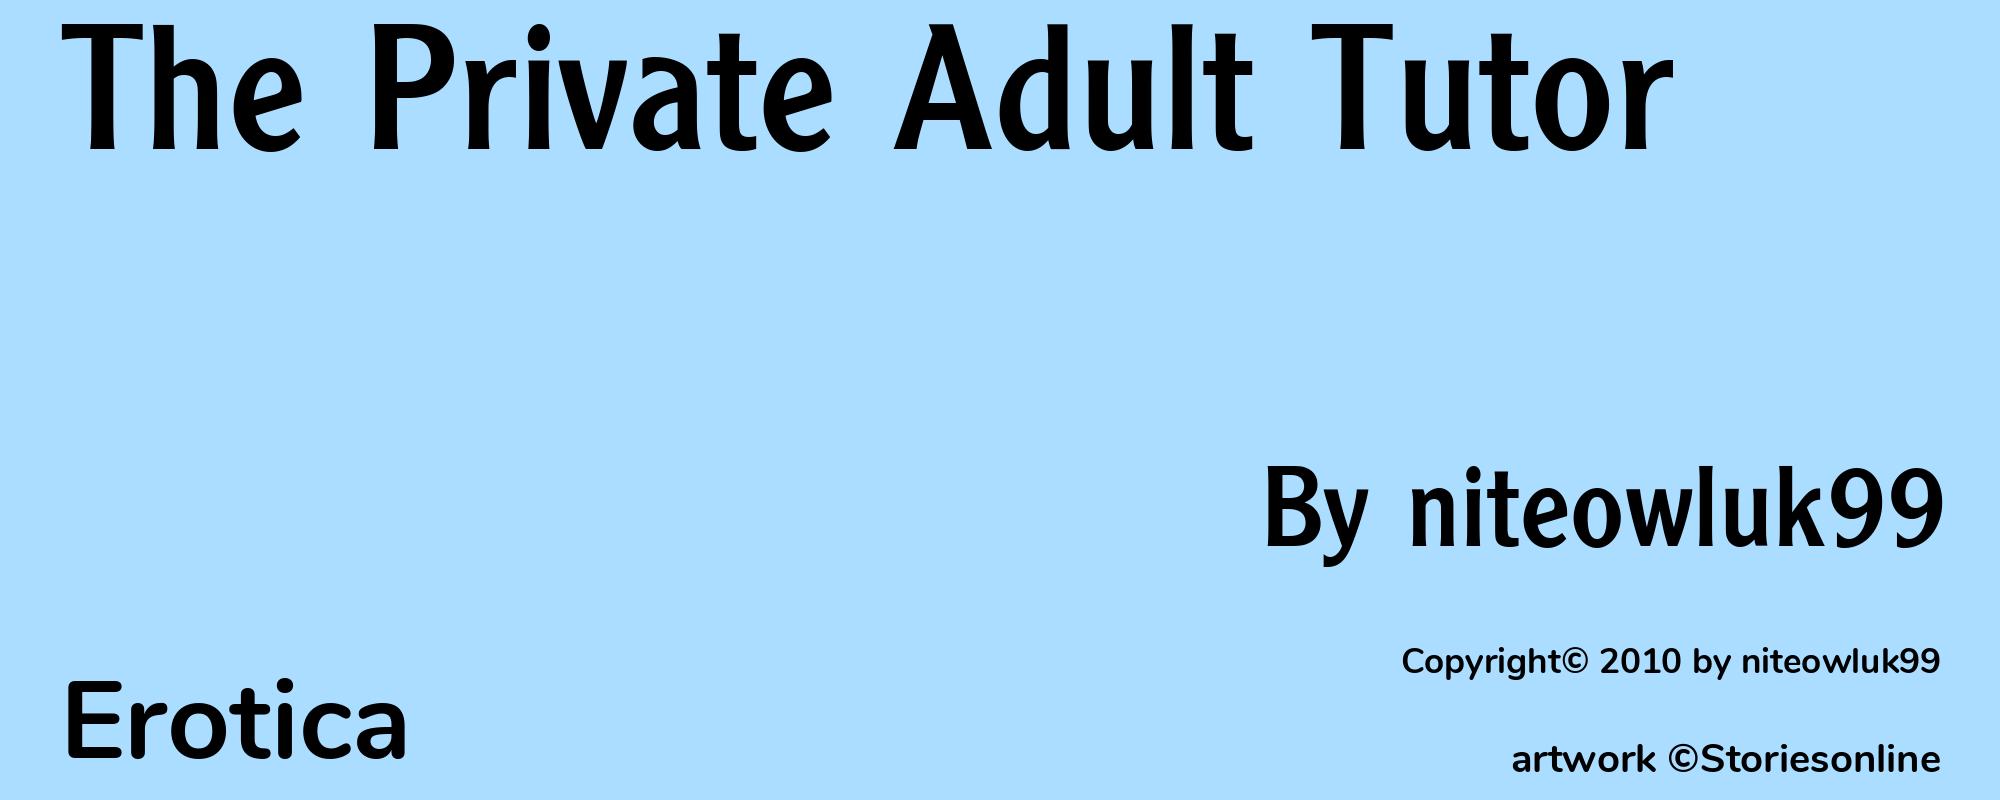 The Private Adult Tutor - Cover